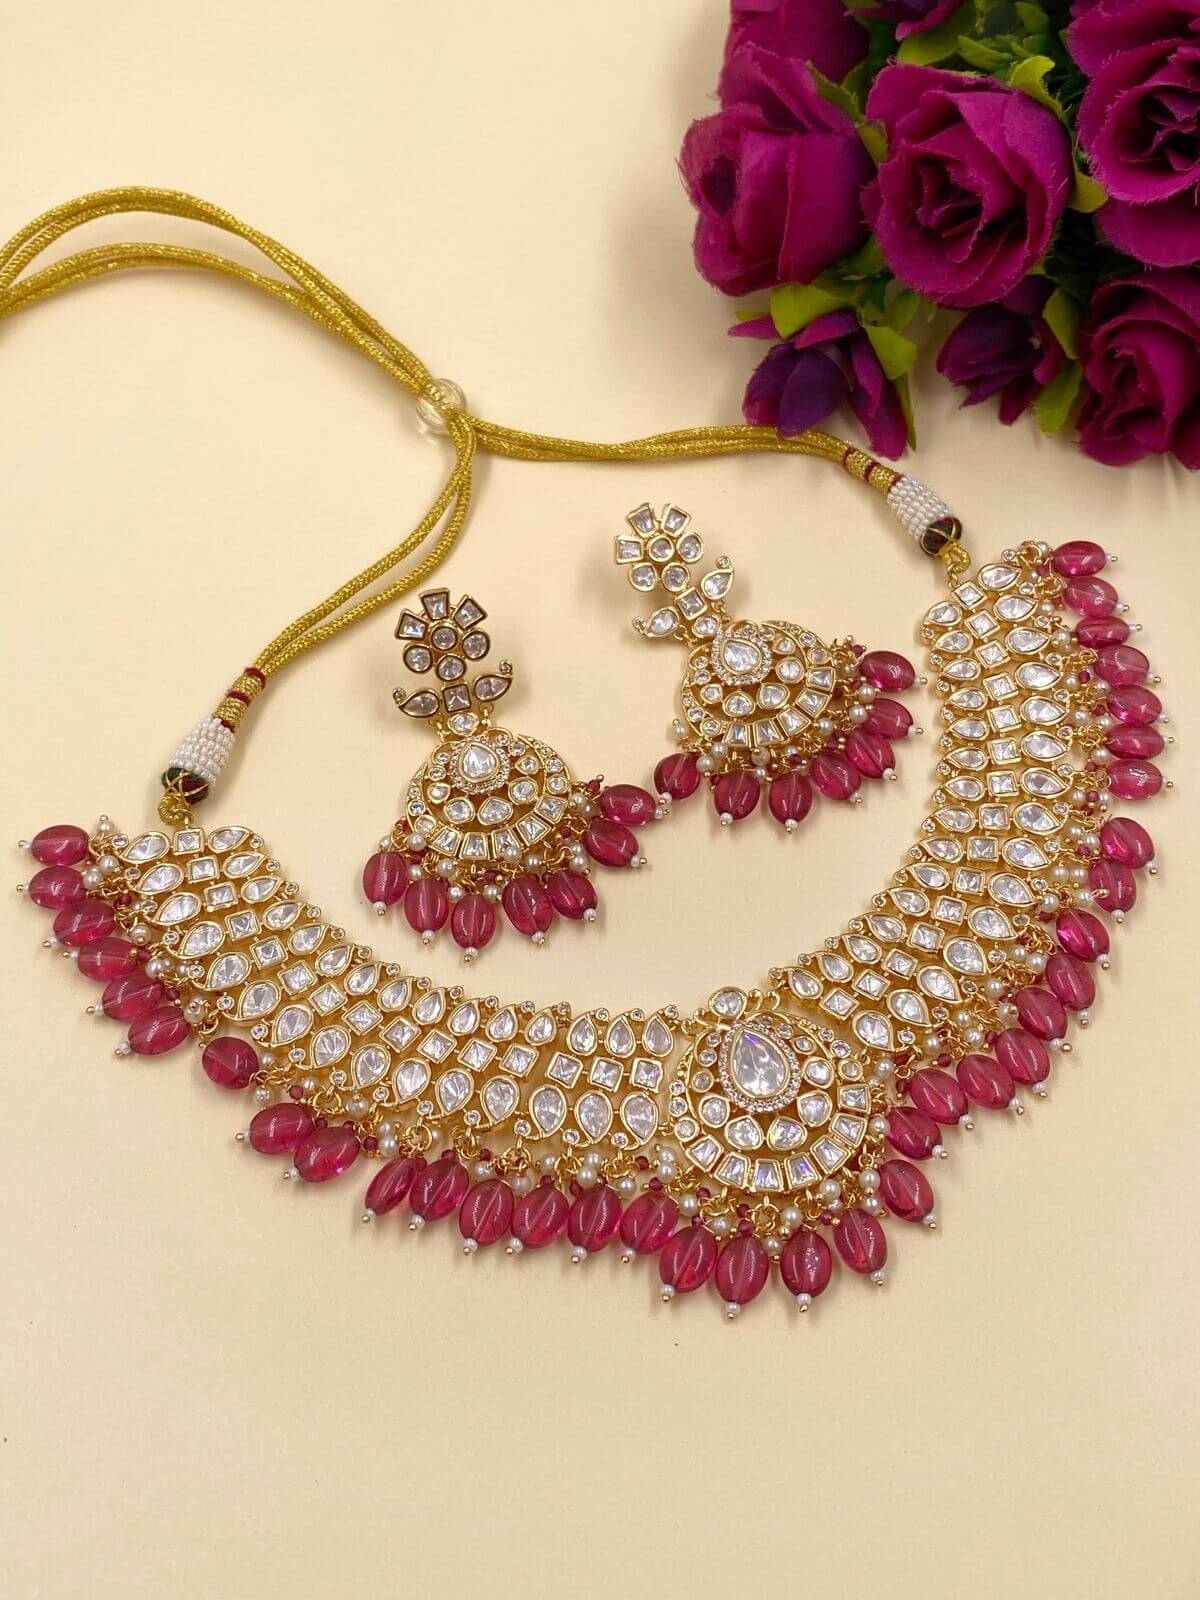  Unique Wedding Pink Polki Jewellery Necklace Set for weddings, parties, sangeet and engagement ceremonies